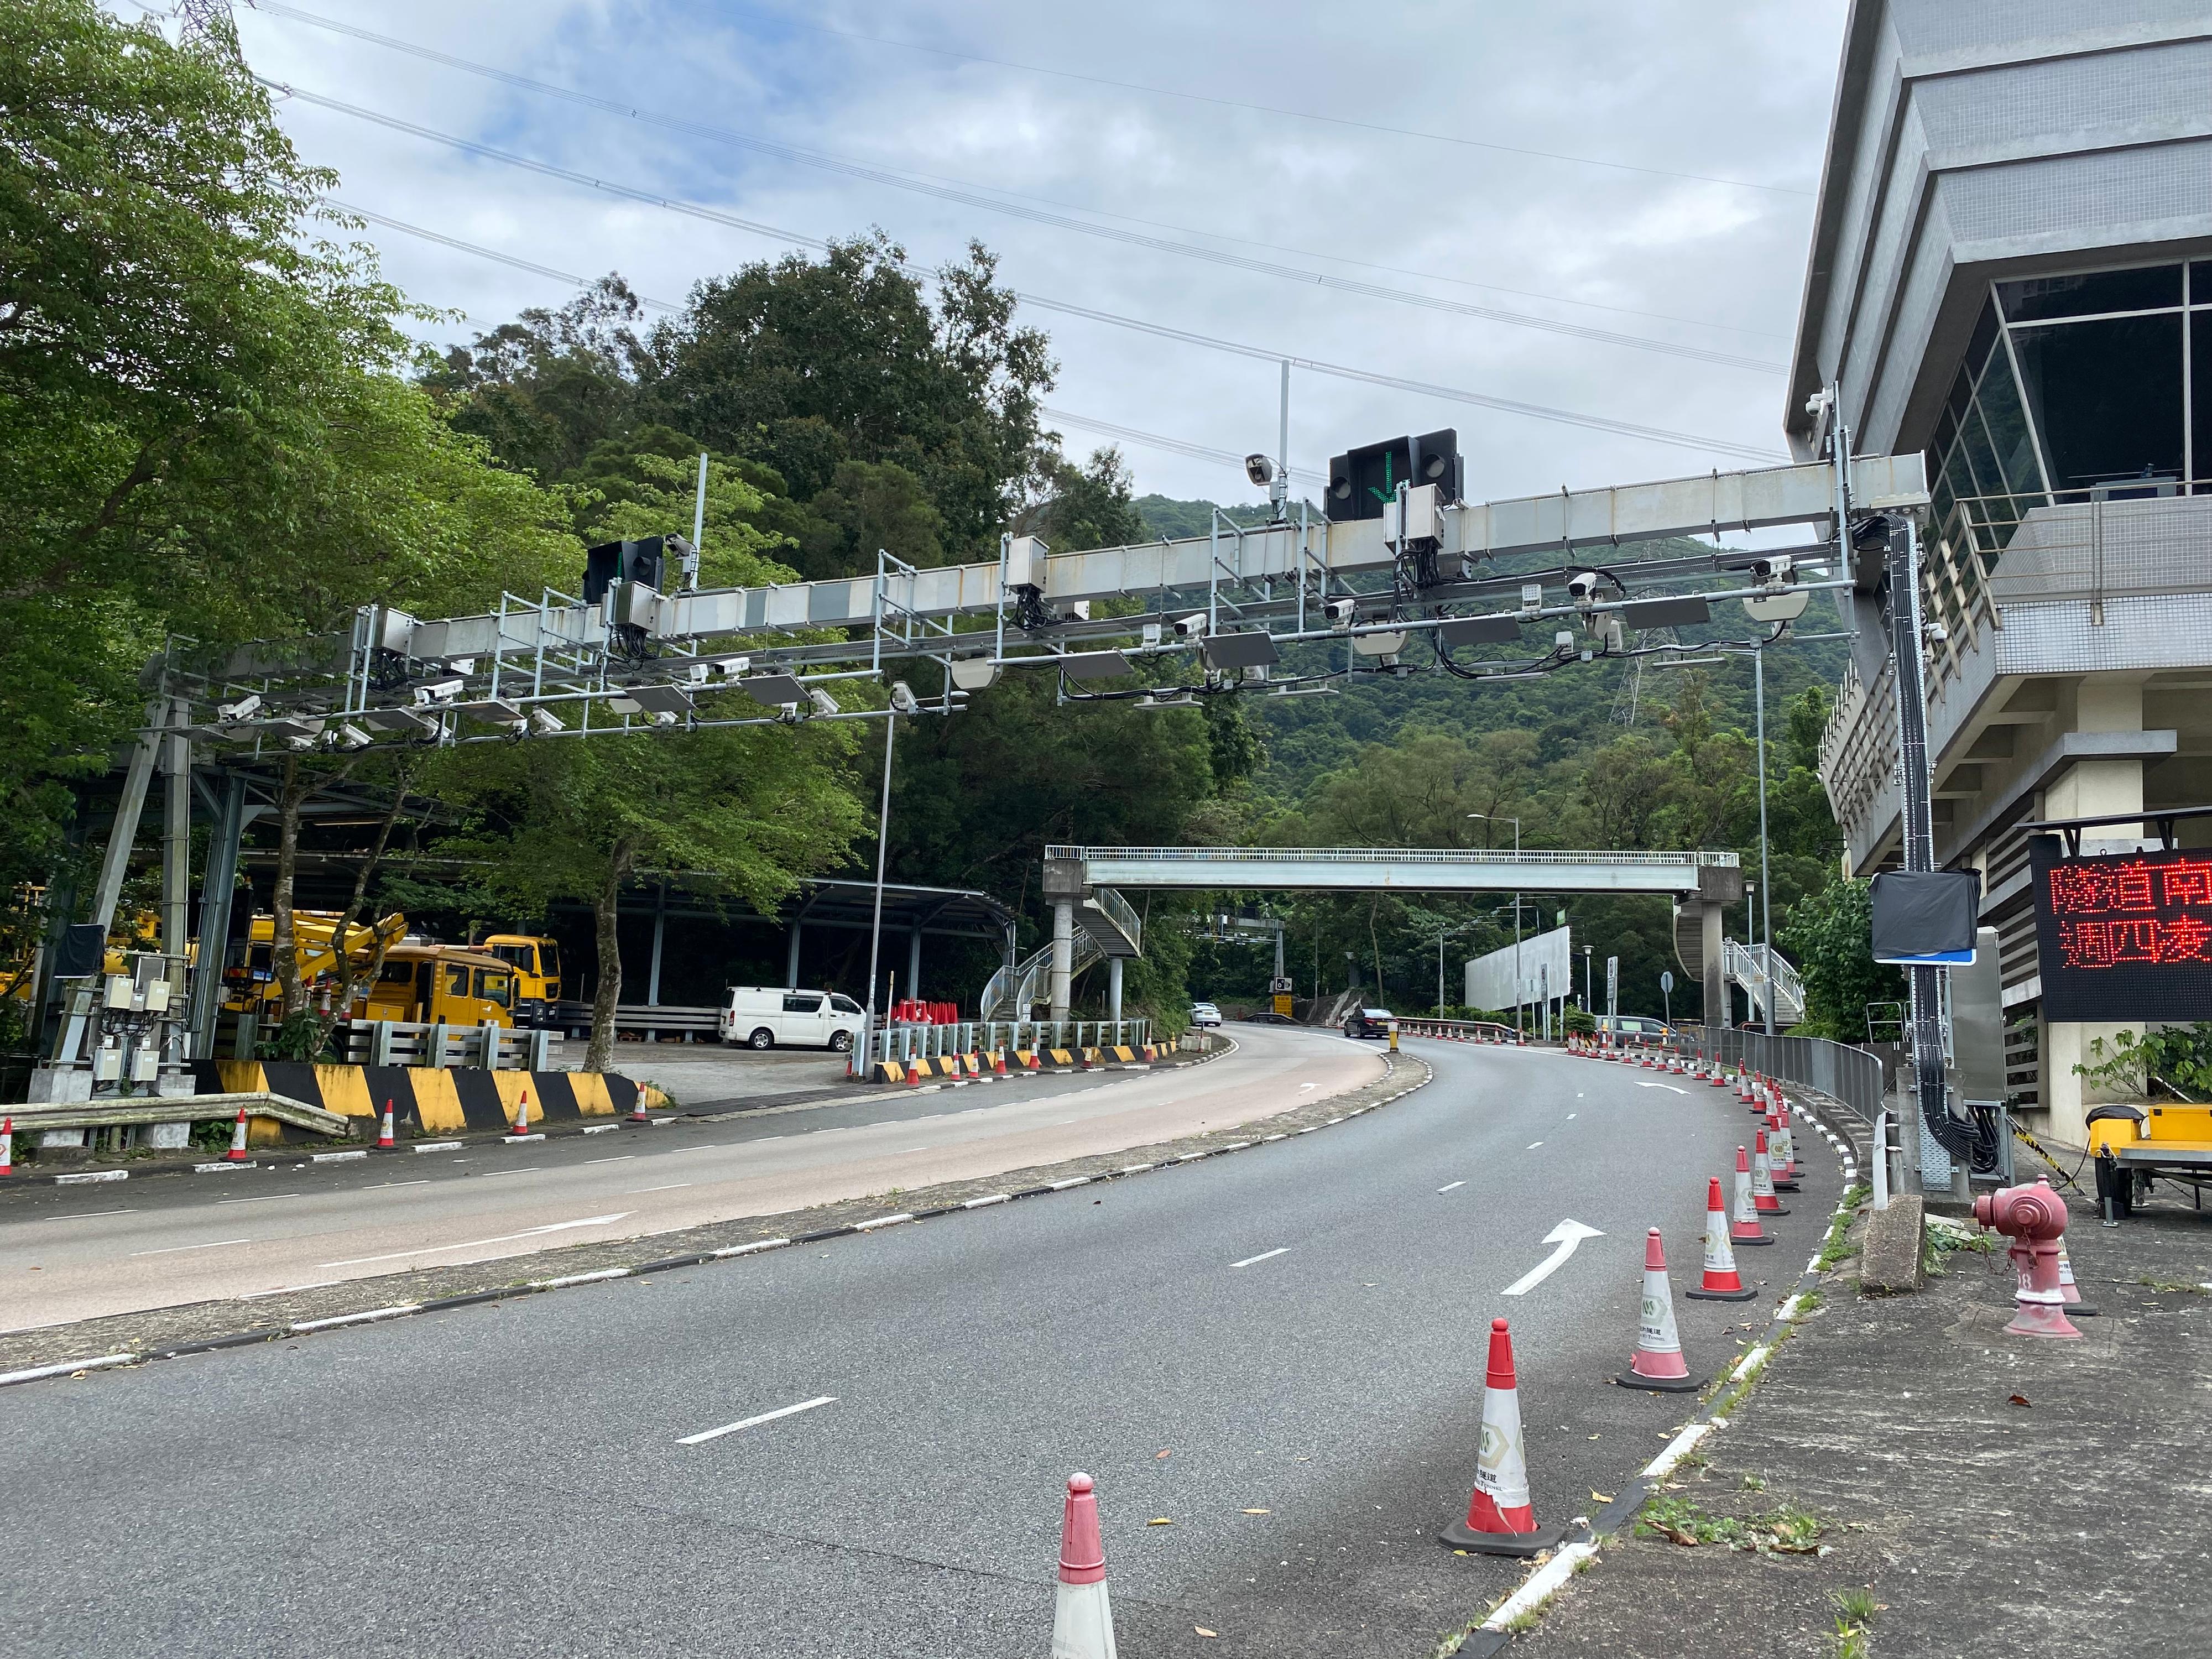 The Transport Department announced today (May 15) that Lion Rock Tunnel will implement the HKeToll from 5am on May 28. Motorists can drive through the toll plazas and pay tolls by the HKeToll, without having to stop or queue at toll booths for payment. Photo shows the HKeToll toll collection facilities (gantry) at the Kowloon-bound Lion Rock Tunnel.